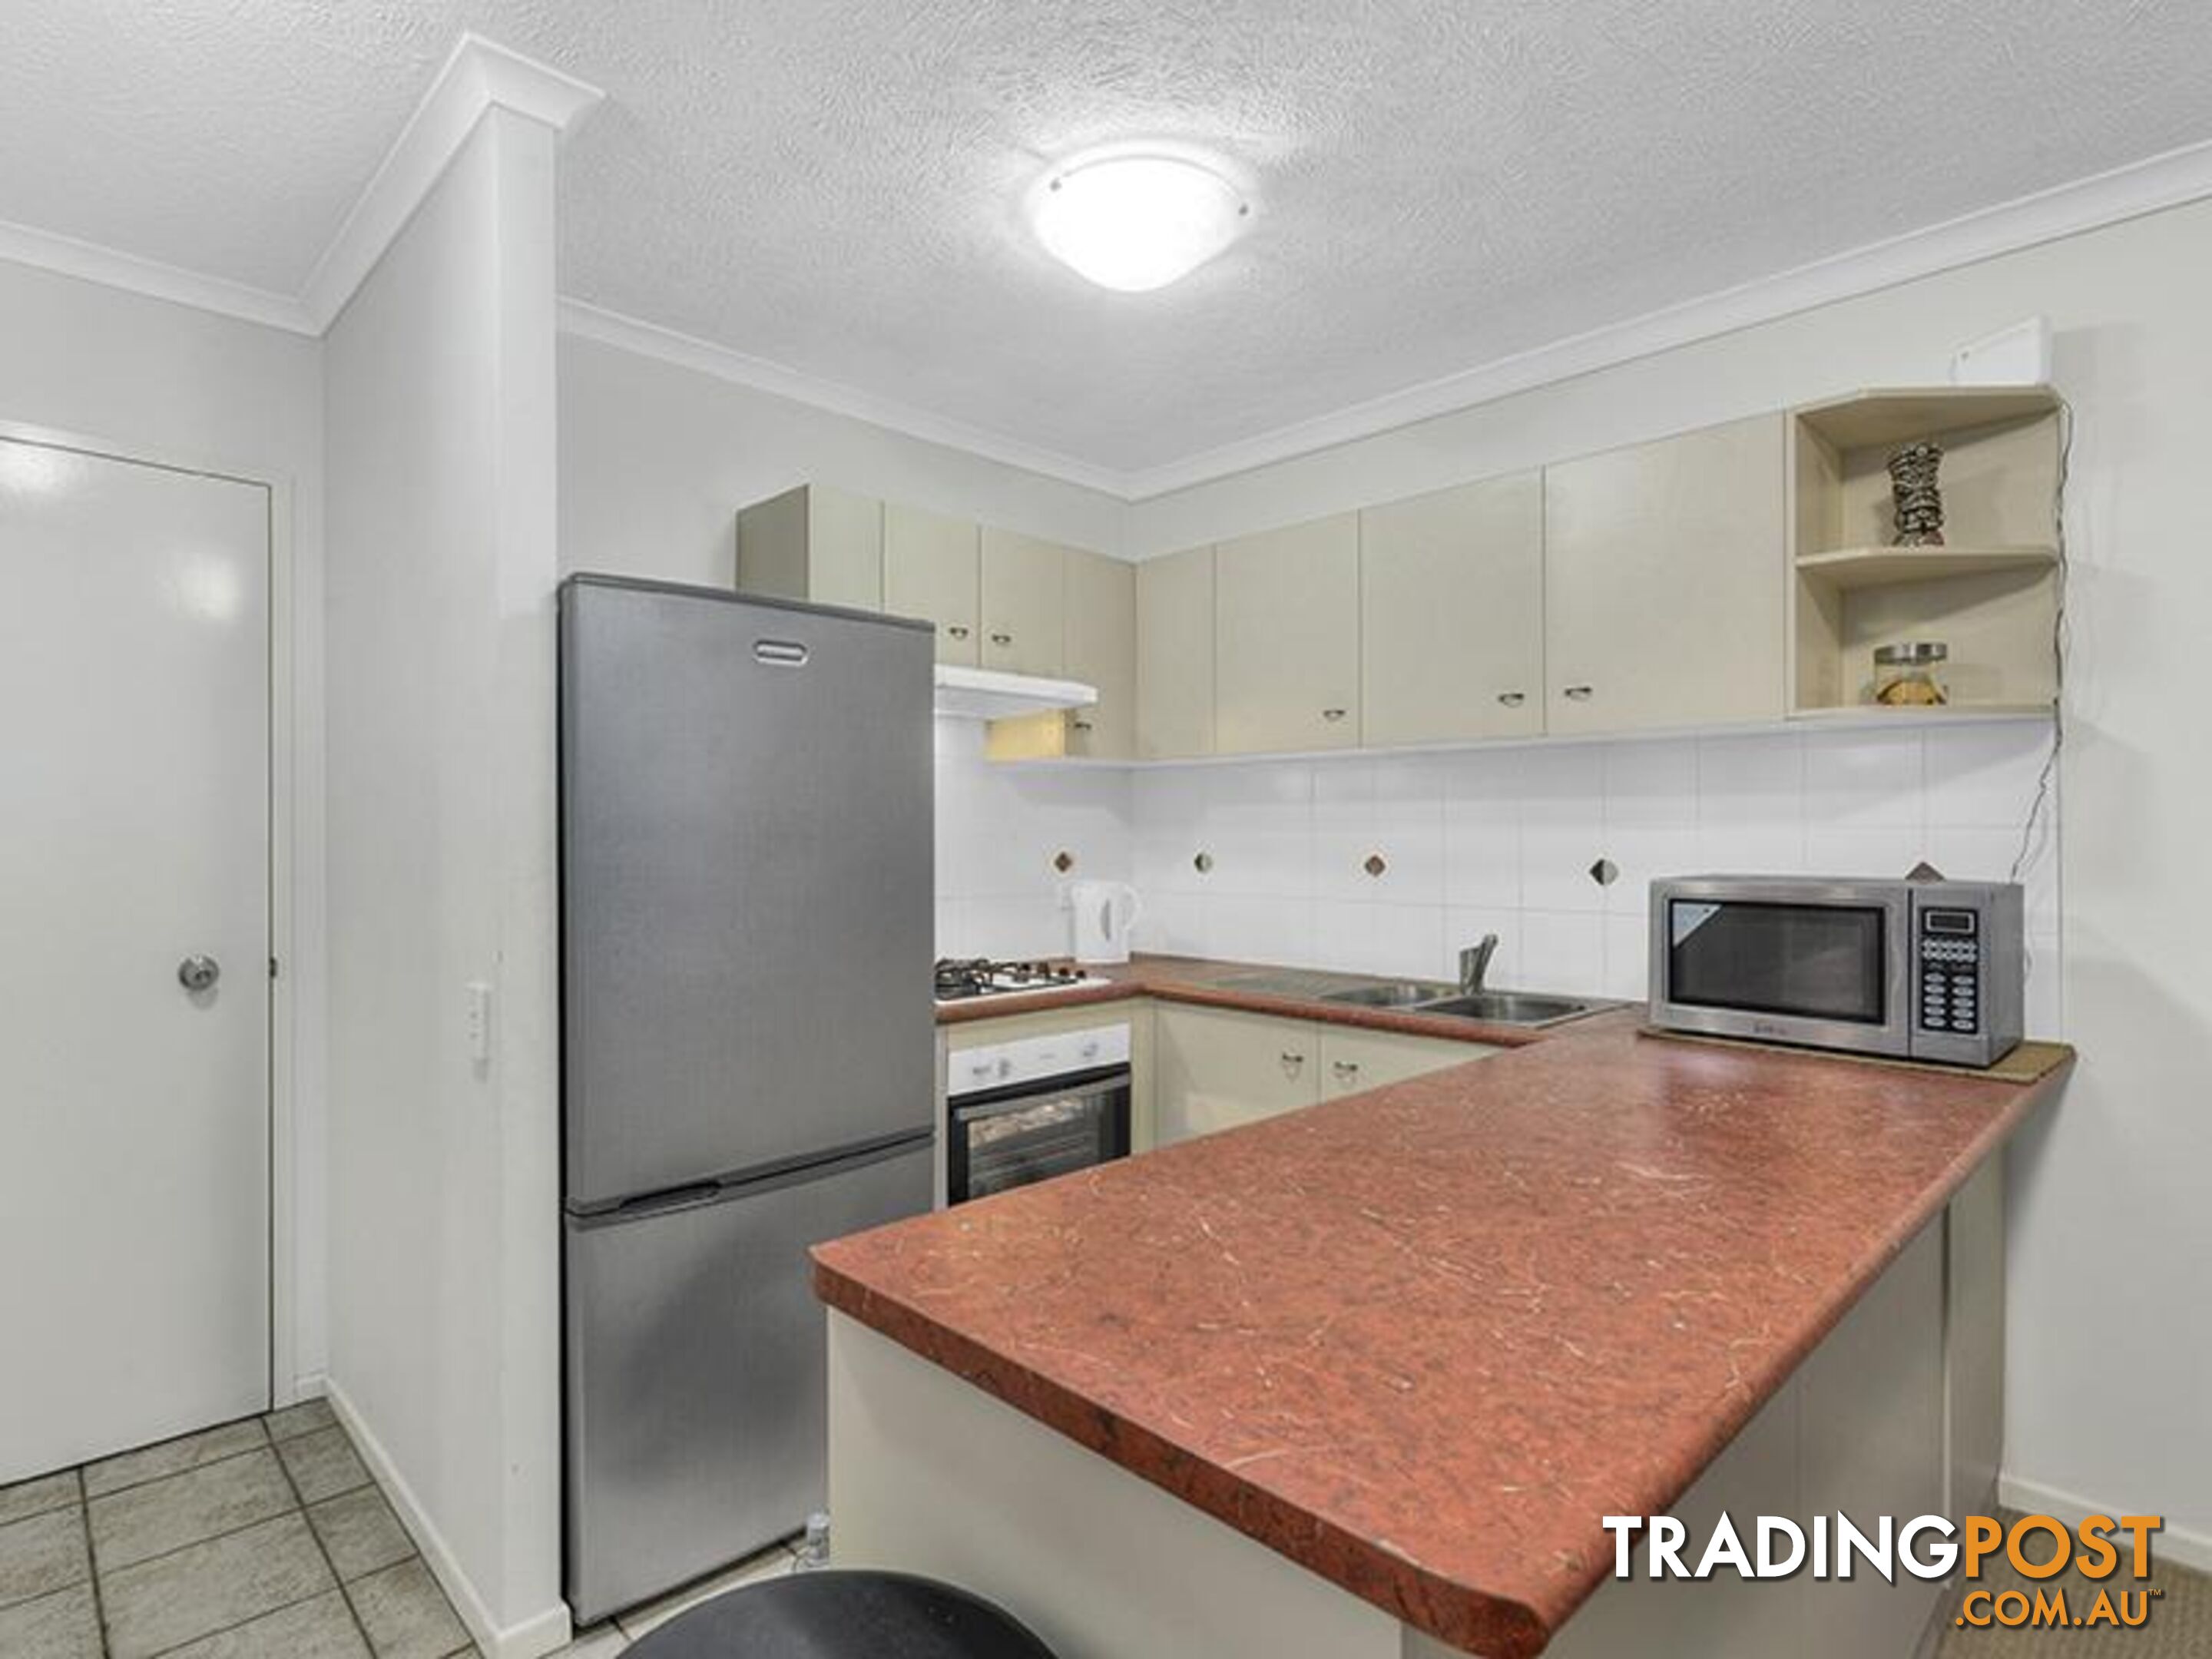 D49 41 Gotha St Fortitude Valley qld 4006